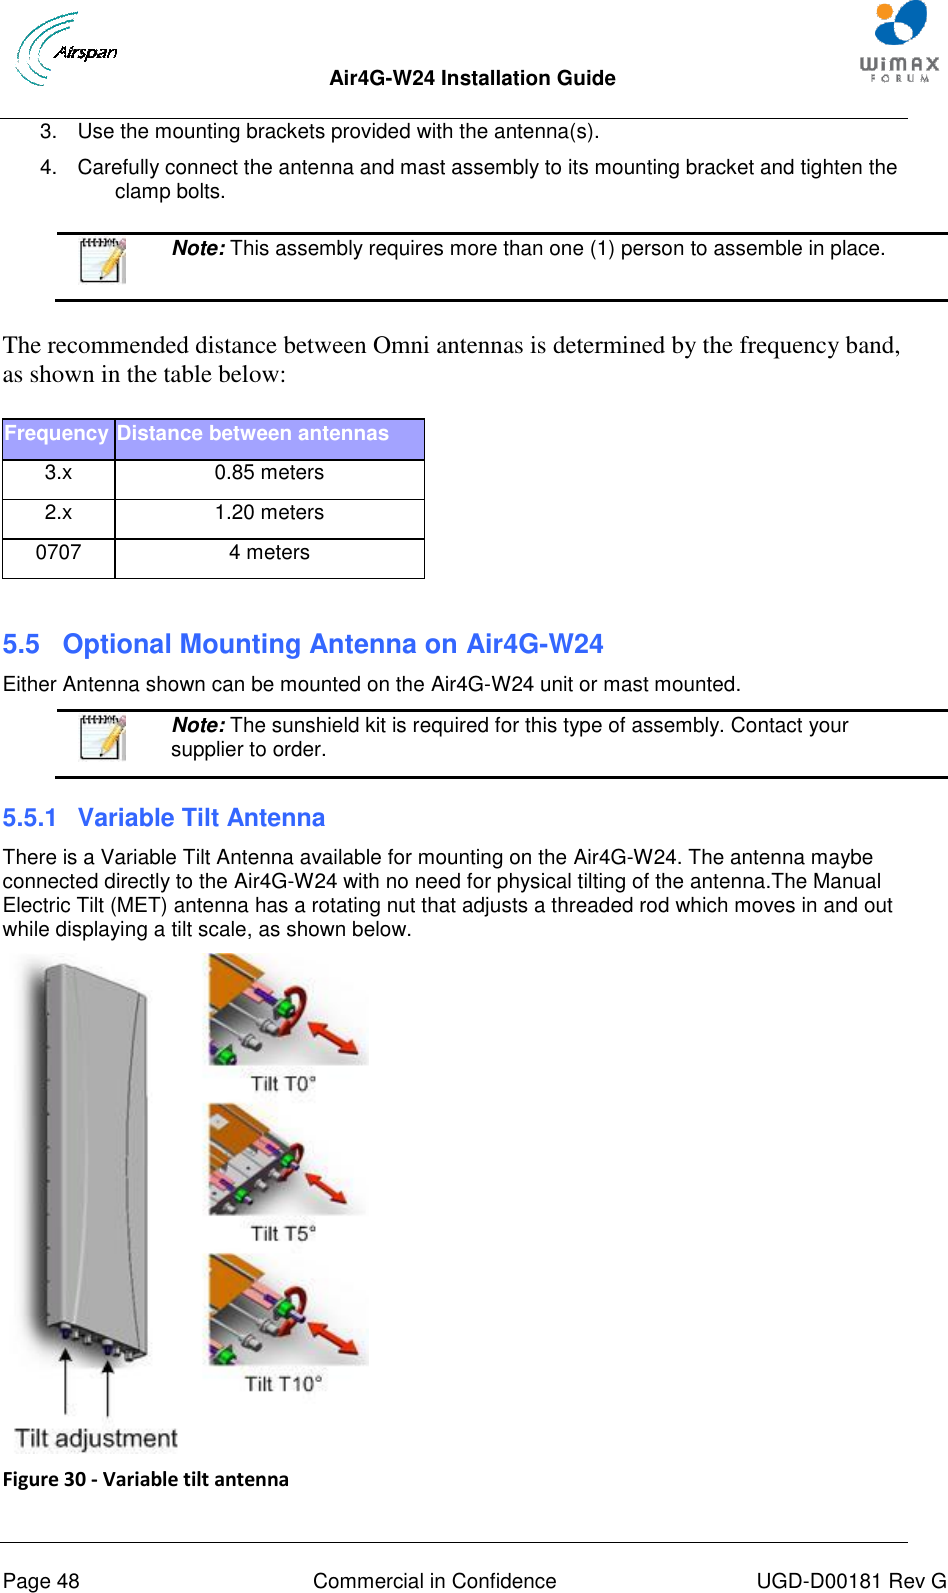  Air4G-W24 Installation Guide       Page 48  Commercial in Confidence  UGD-D00181 Rev G 3.  Use the mounting brackets provided with the antenna(s).  4.  Carefully connect the antenna and mast assembly to its mounting bracket and tighten the clamp bolts.     Note: This assembly requires more than one (1) person to assemble in place. The recommended distance between Omni antennas is determined by the frequency band, as shown in the table below: Frequency Distance between antennas 3.x 0.85 meters 2.x 1.20 meters 0707 4 meters  5.5  Optional Mounting Antenna on Air4G-W24 Either Antenna shown can be mounted on the Air4G-W24 unit or mast mounted.   Note: The sunshield kit is required for this type of assembly. Contact your supplier to order. 5.5.1  Variable Tilt Antenna There is a Variable Tilt Antenna available for mounting on the Air4G-W24. The antenna maybe connected directly to the Air4G-W24 with no need for physical tilting of the antenna.The Manual Electric Tilt (MET) antenna has a rotating nut that adjusts a threaded rod which moves in and out while displaying a tilt scale, as shown below.  Figure 30 - Variable tilt antenna   